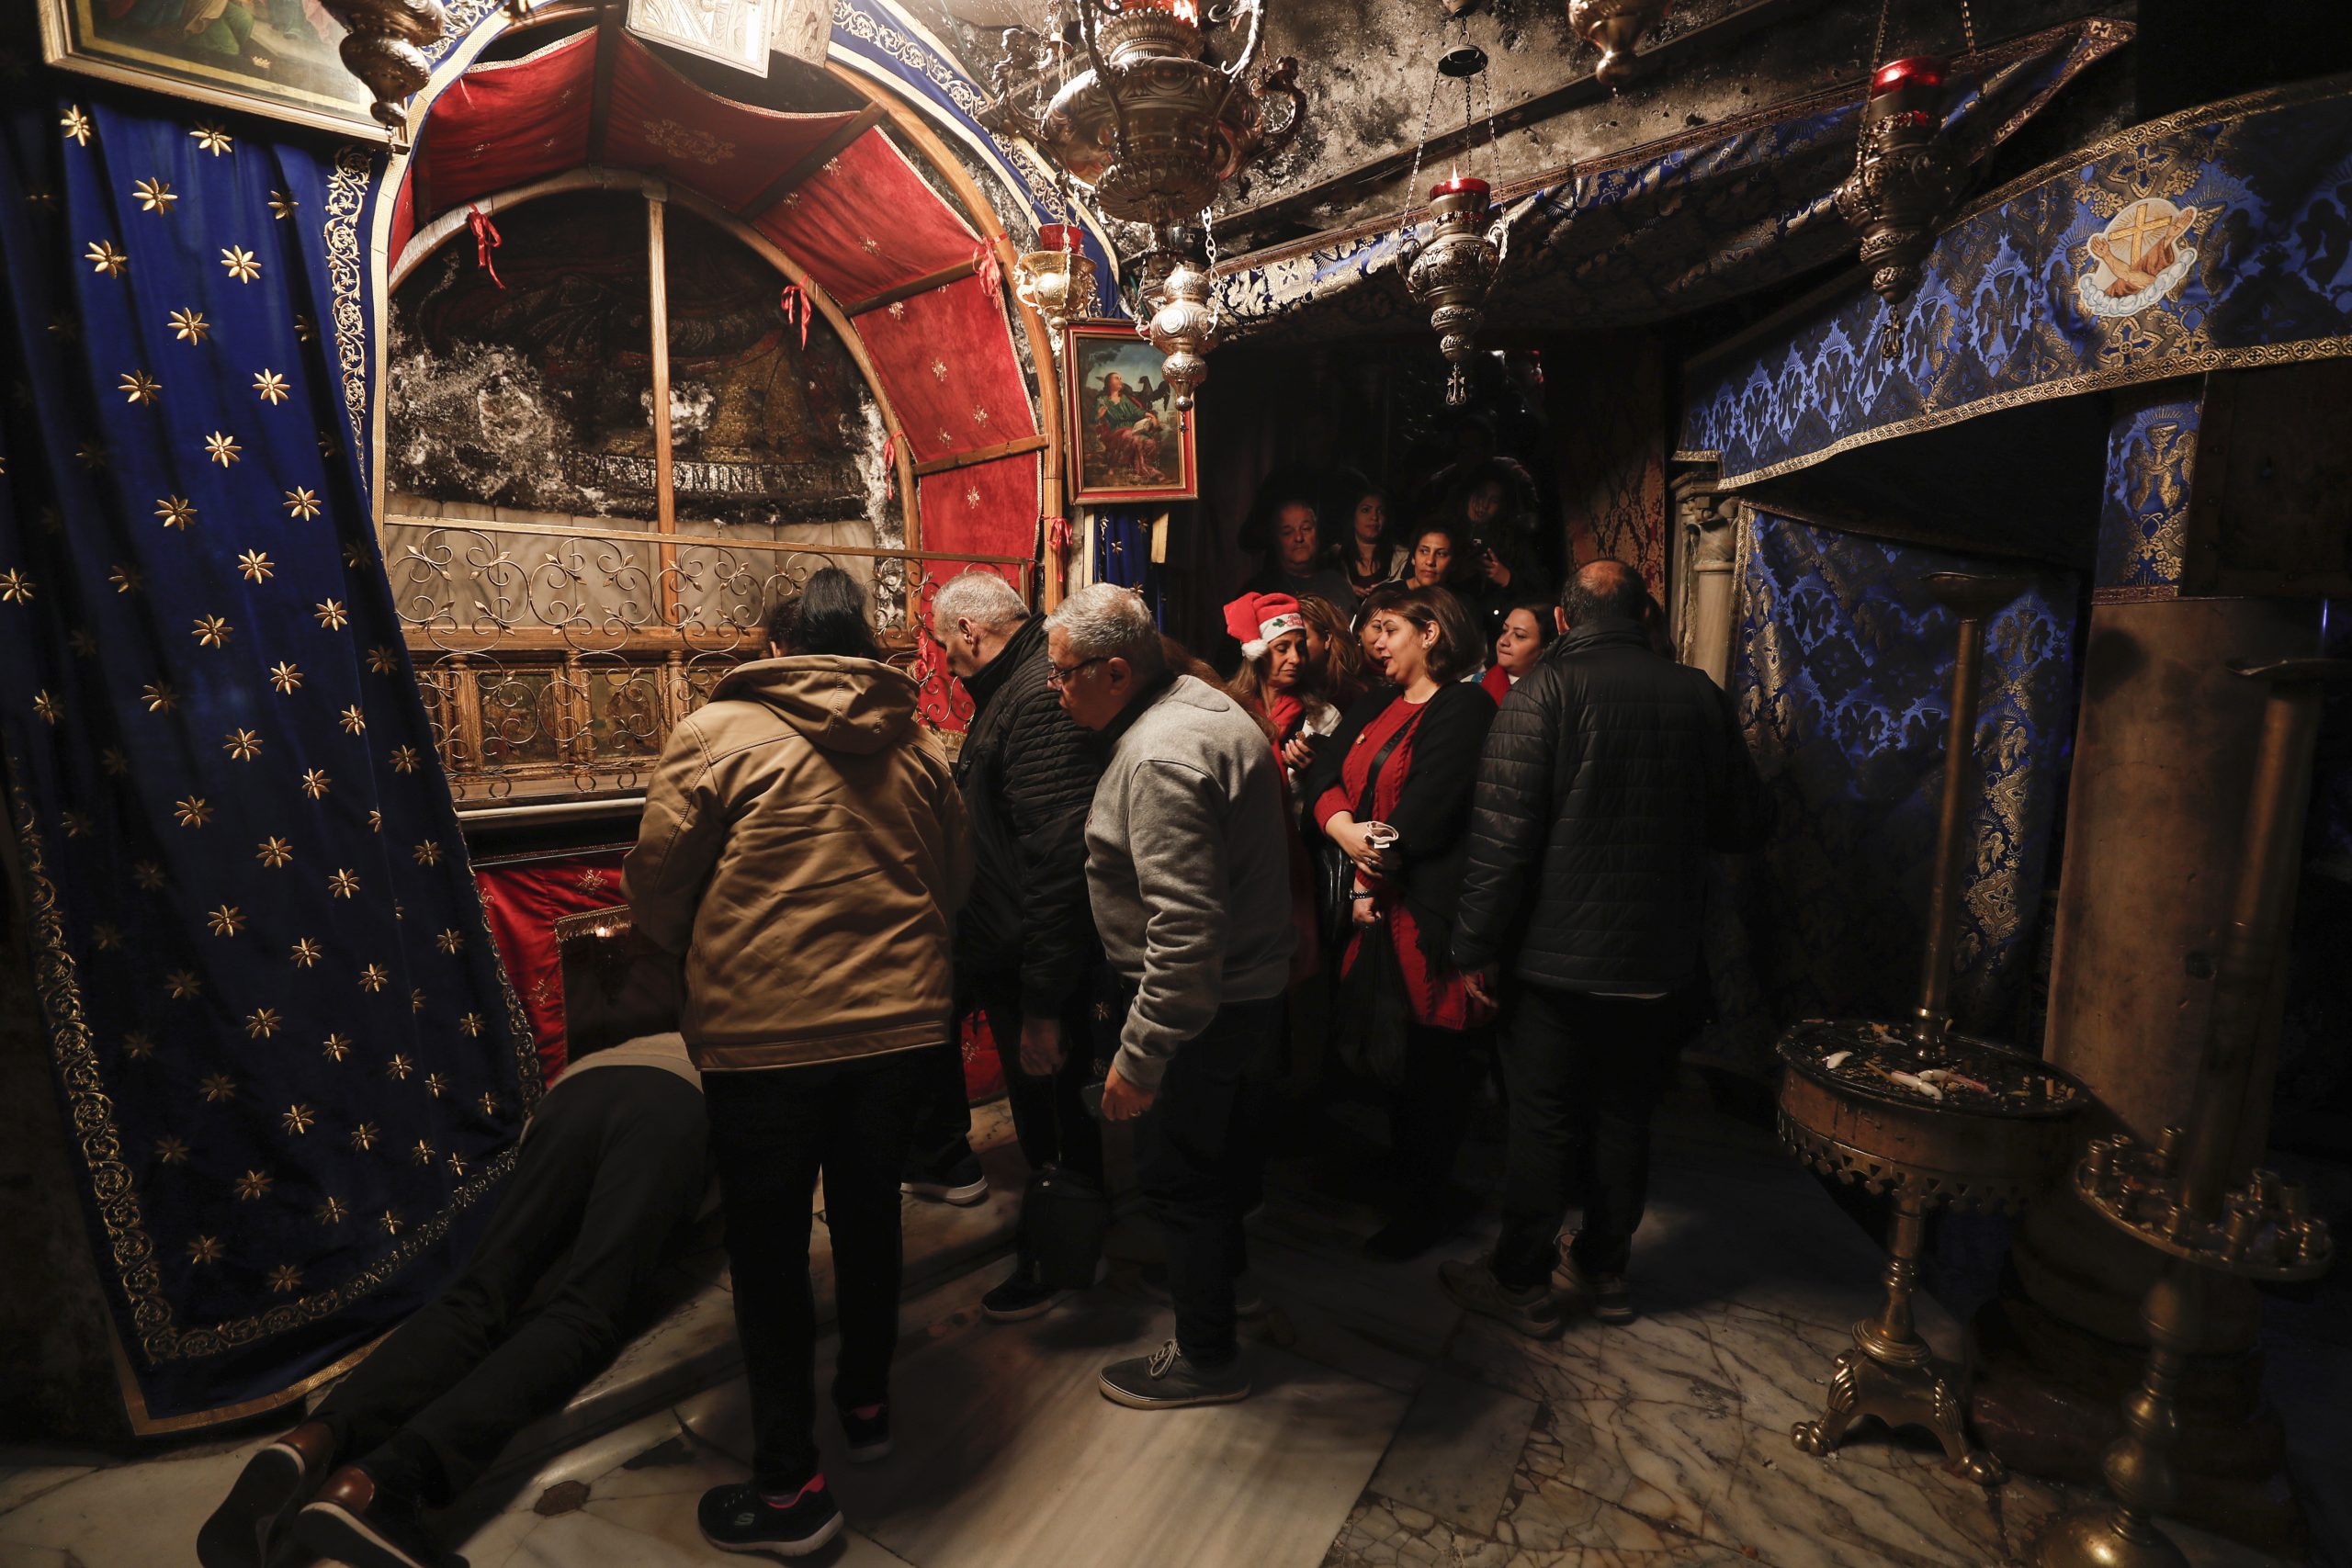 epa10377245 Christian pilgrims pray at the Grotto in the Church of Nativity ahead of Christmas, in Bethlehem, West Bank, 23 December 2022, Church of the Nativity is one of the oldest continuously operating churches worldwide. The structure is built over the cave that tradition marks as the birthplace of Christ, and it is considered sacred by followers of Christianity.  EPA/ATEF SAFADI